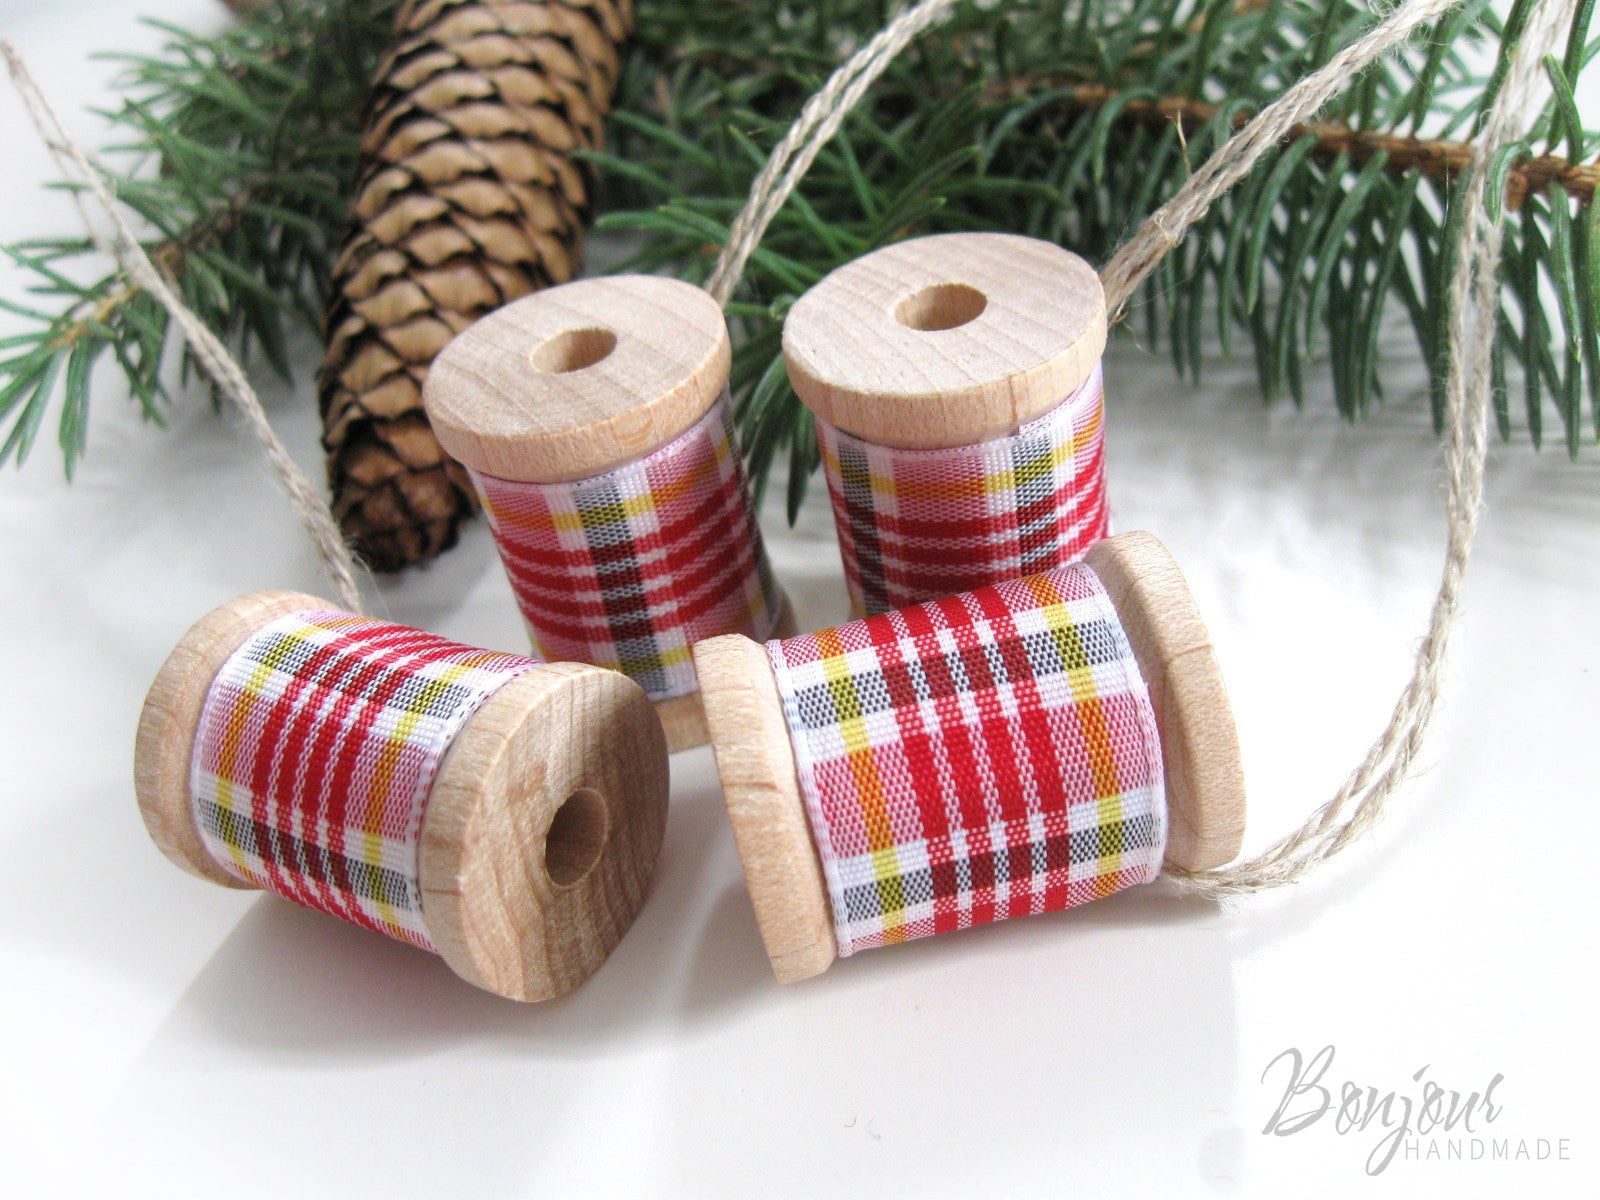 Fun Chrismas ornaments for sewists